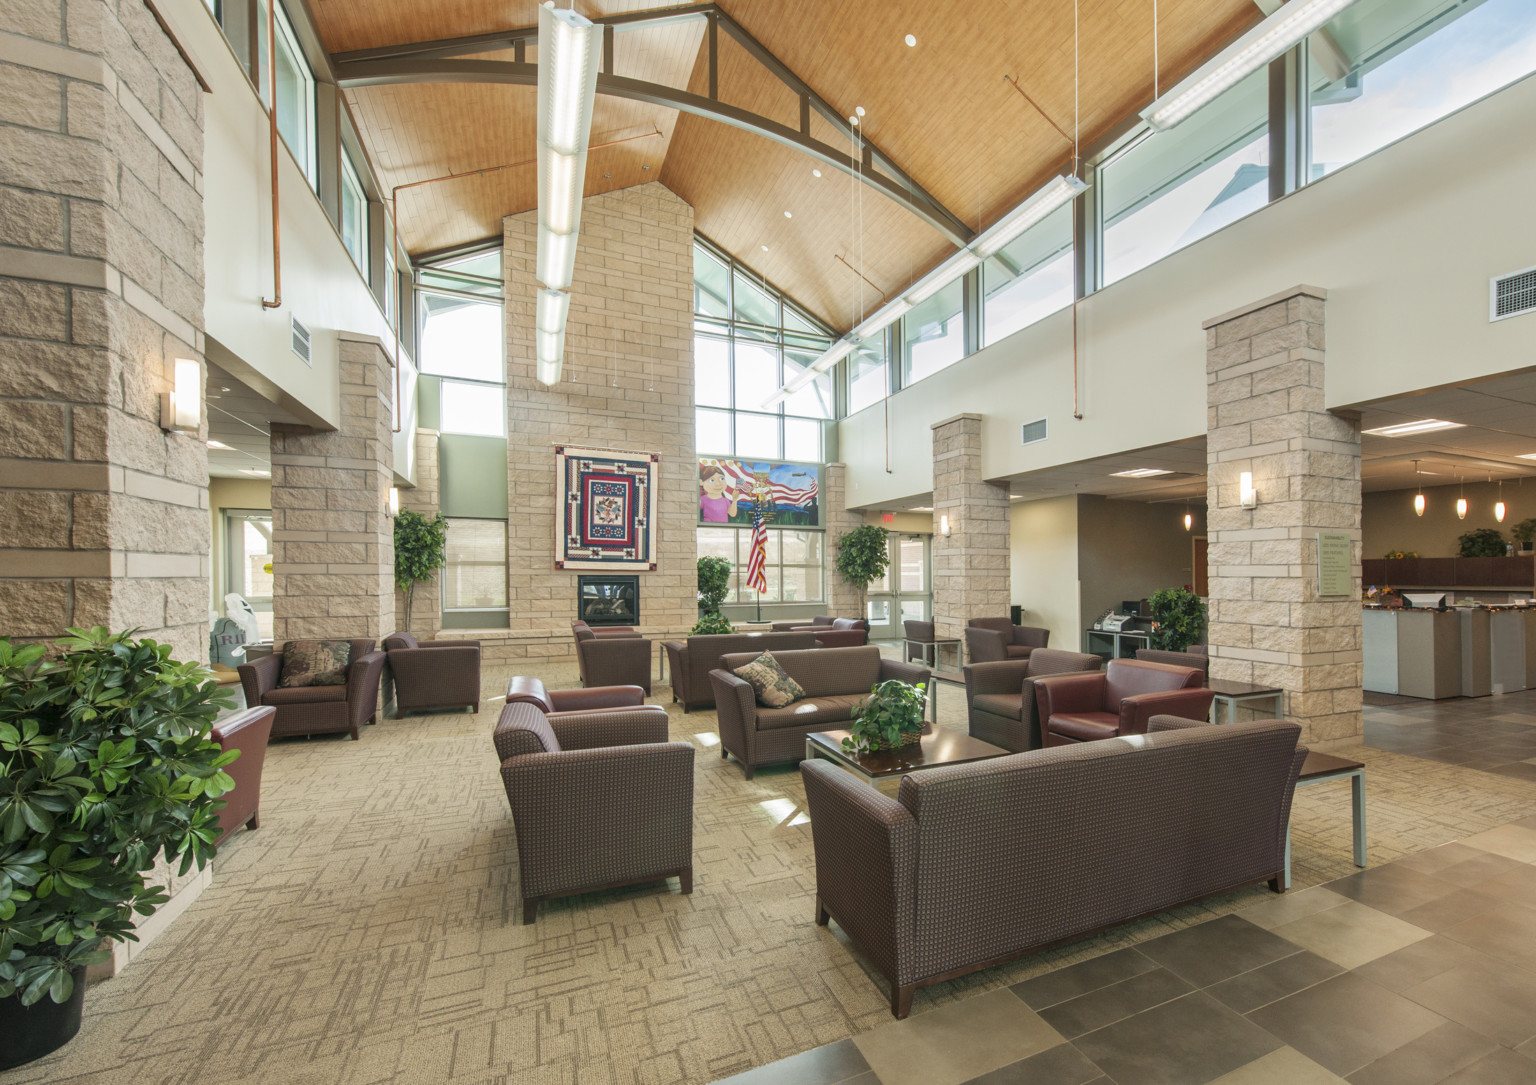 A view of the main room in the soldier family assistance center, brown tile and carpet with burgundy sofas and chairs, tan stone columns support neutral walls with clerestory windows provide daylight views, plants promote harmony